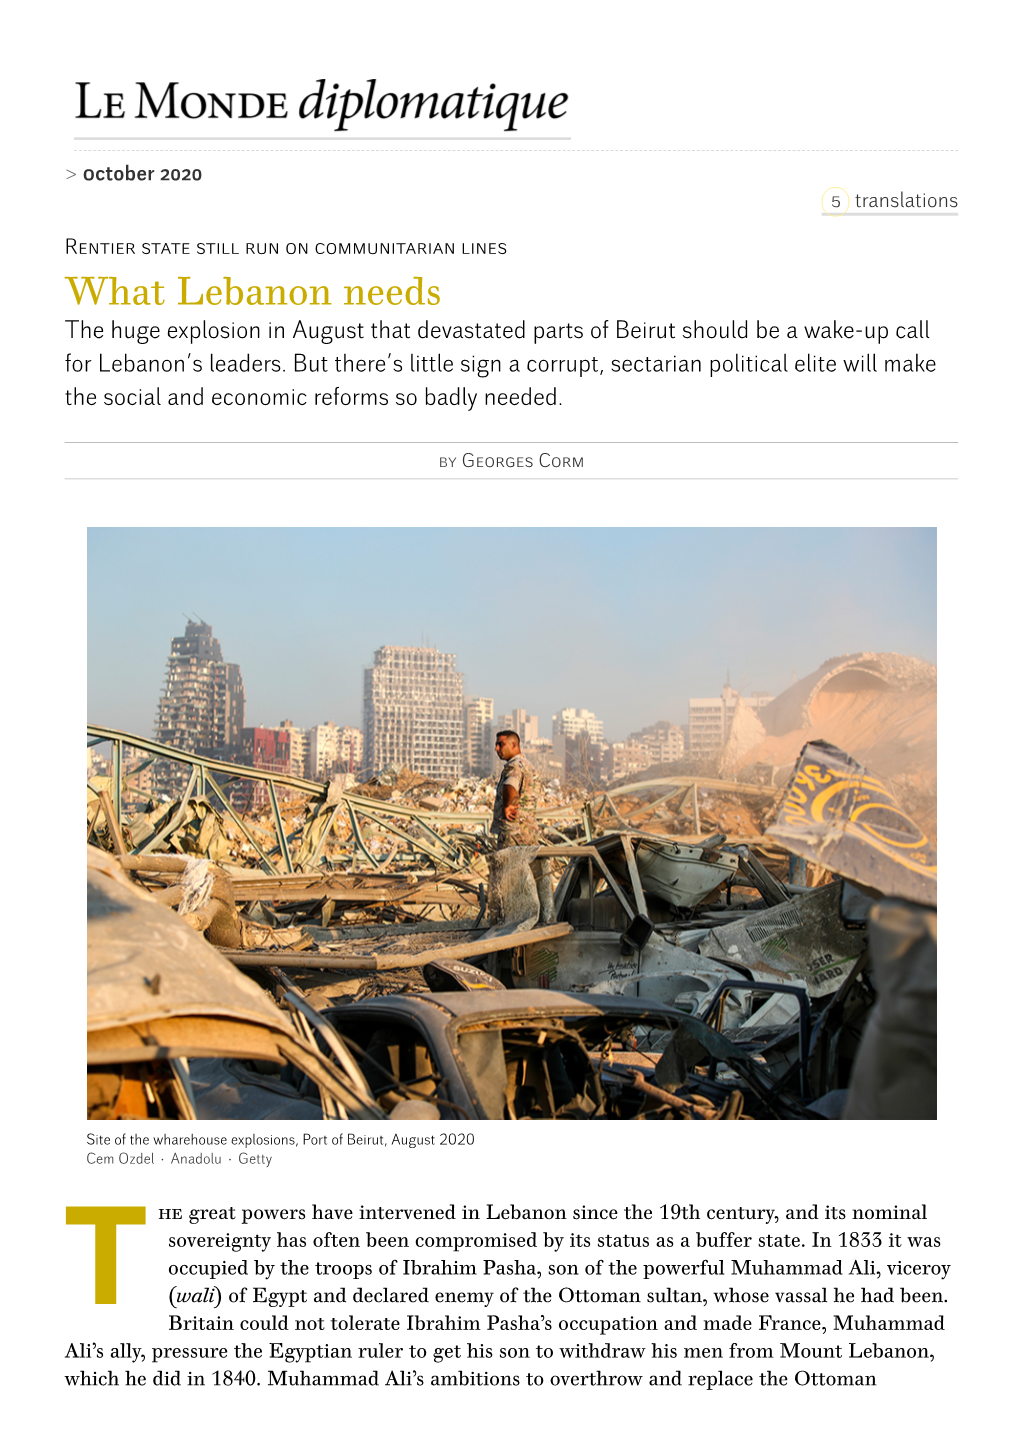 What Lebanon Needs the Huge Explosion in August That Devastated Parts of Beirut Should Be a Wake-Up Call for Lebanon’S Leaders